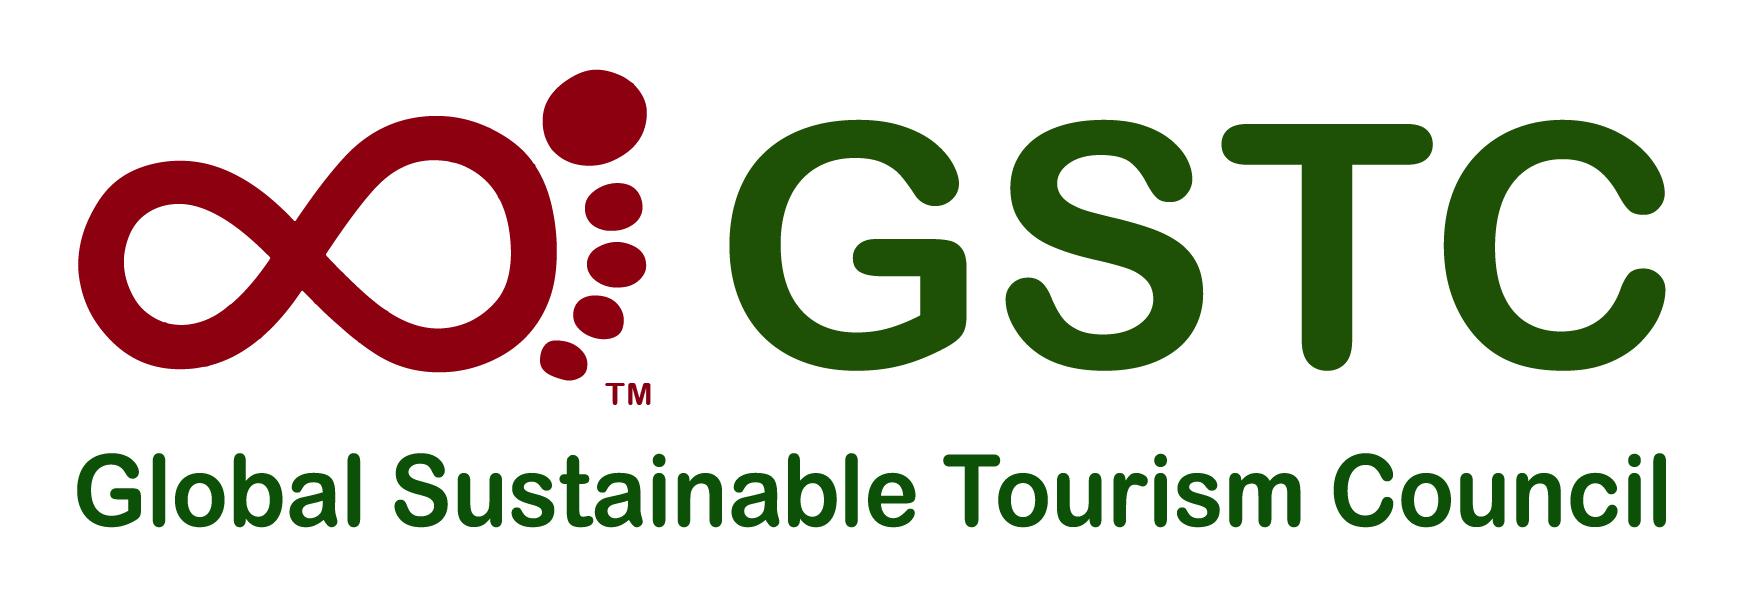 USA - Global Sustainable Tourism Council (GSTC)